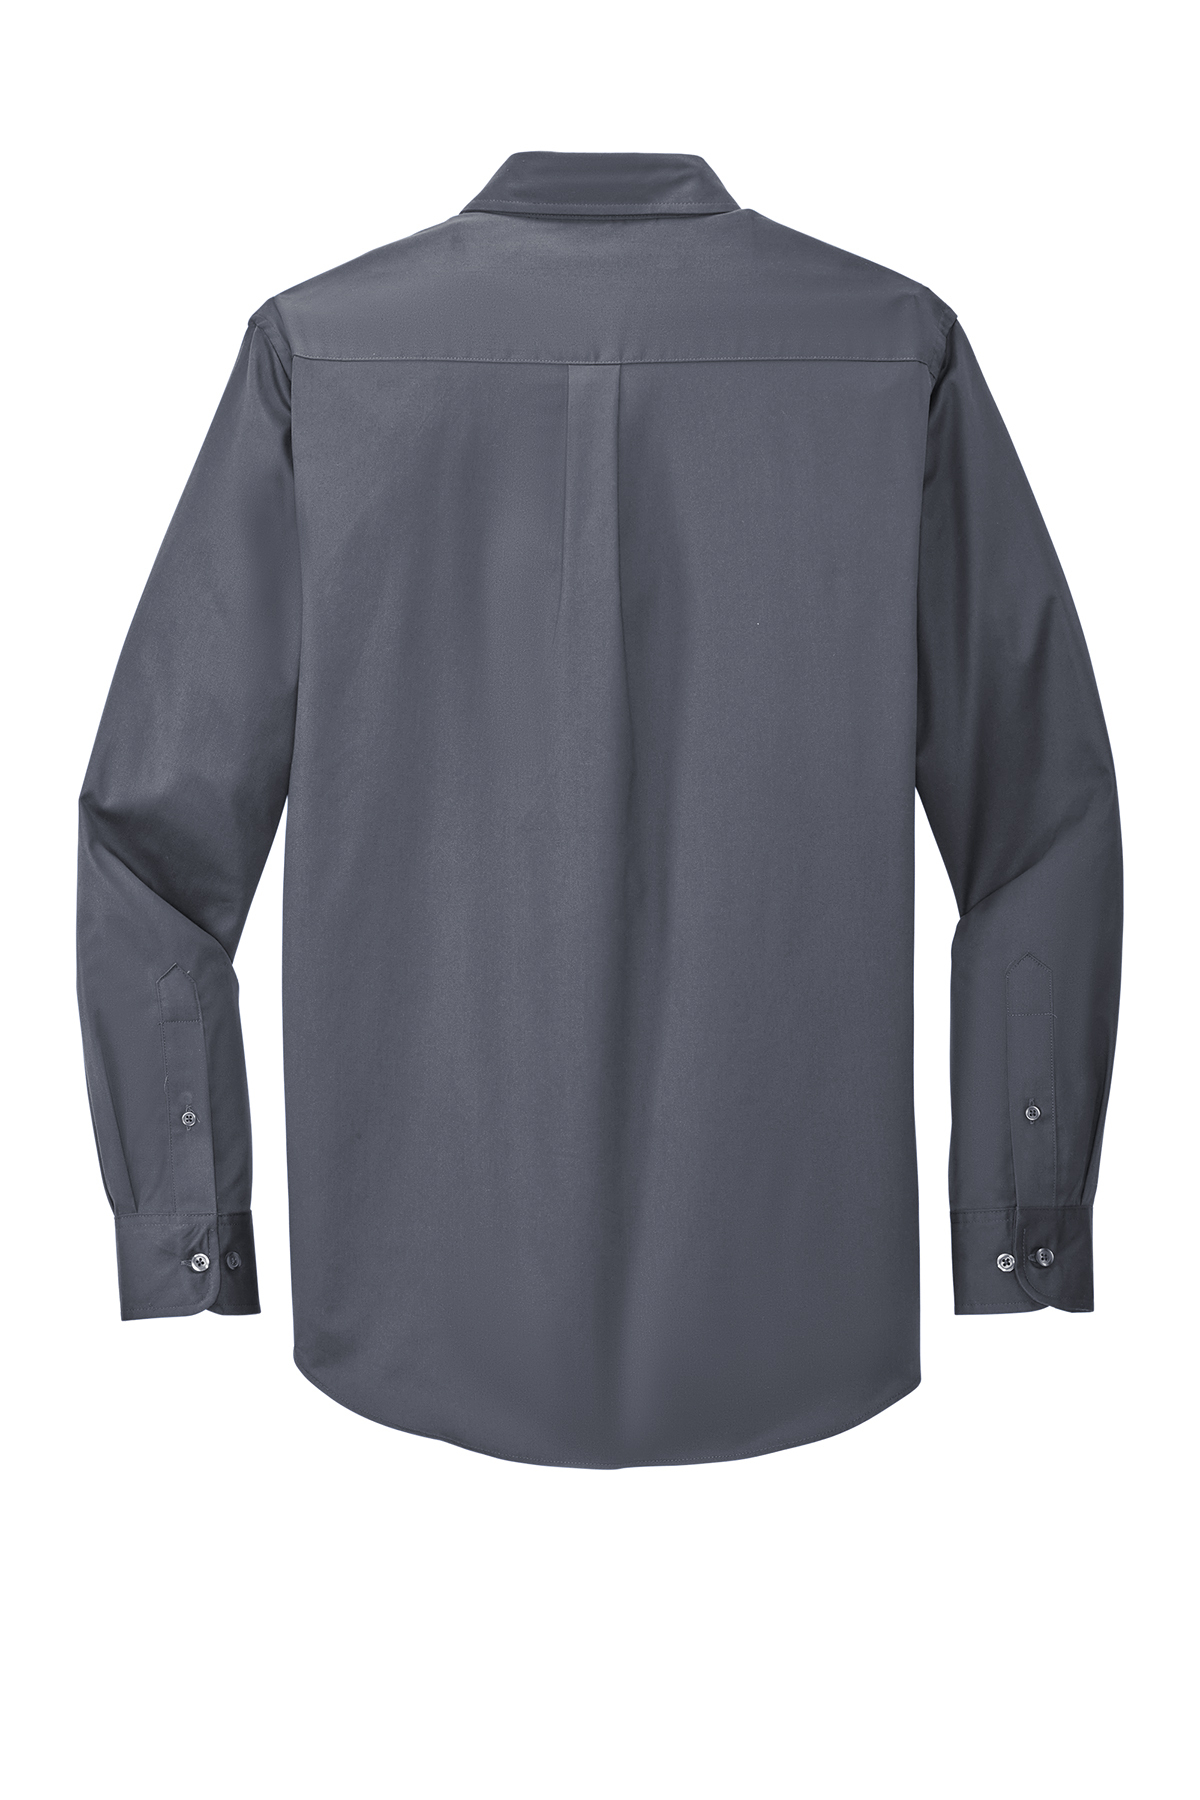 Port Authority S608/TLS608/S608ES Mens Dark Green Easy Care Wrinkle  Resistant Long Sleeve Button Down Shirt w/ Pocket —